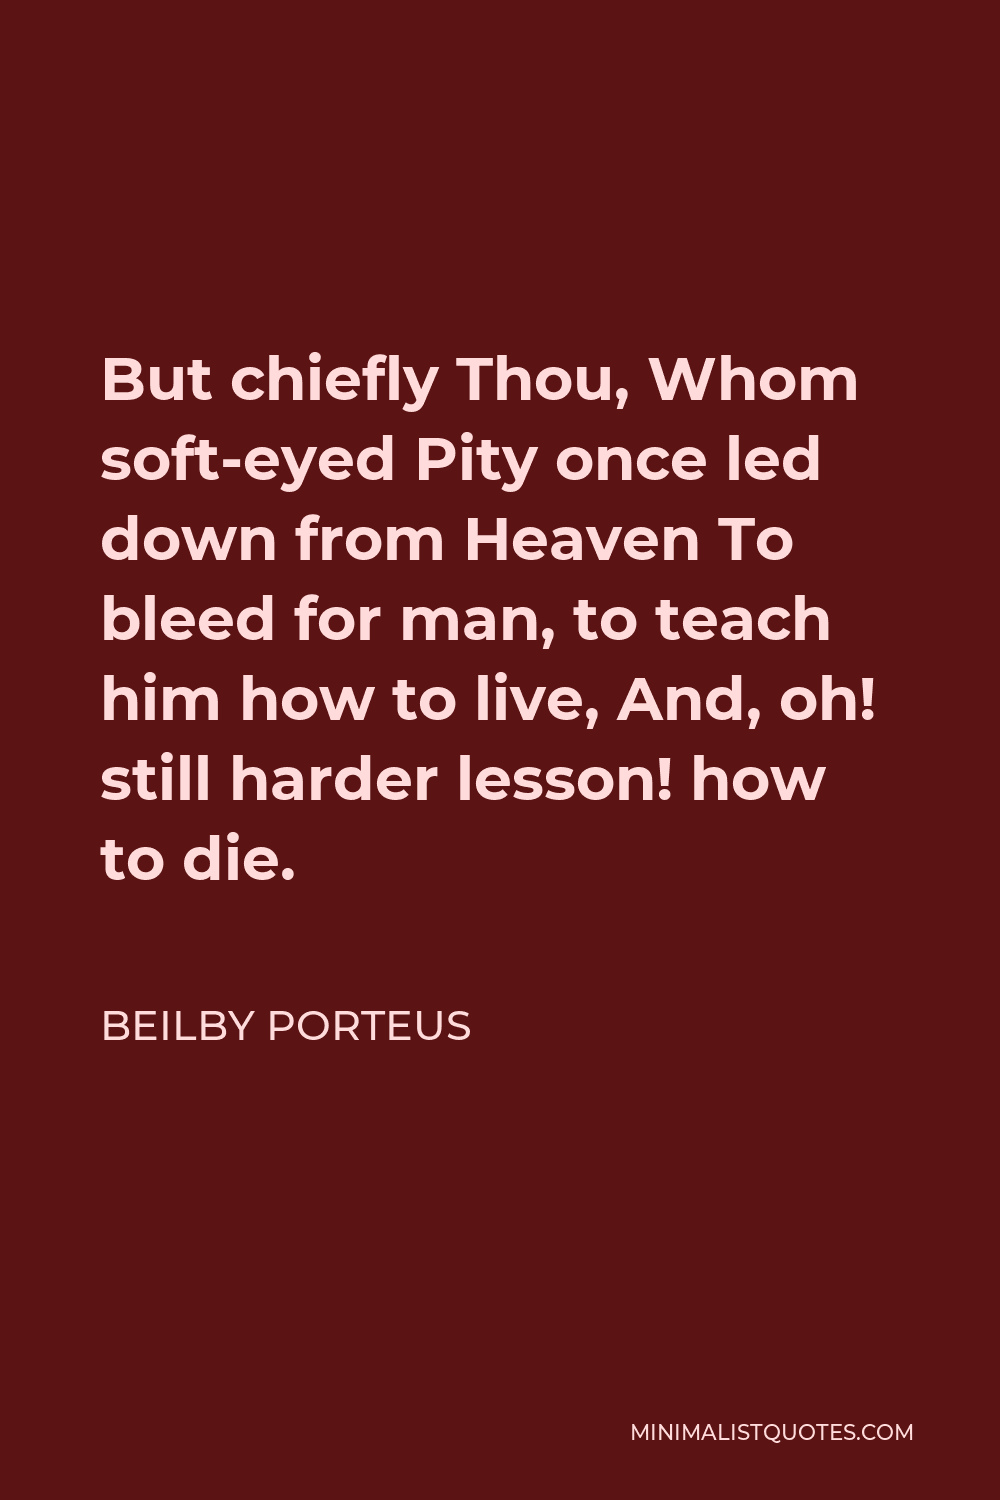 Beilby Porteus Quote - But chiefly Thou, Whom soft-eyed Pity once led down from Heaven To bleed for man, to teach him how to live, And, oh! still harder lesson! how to die.